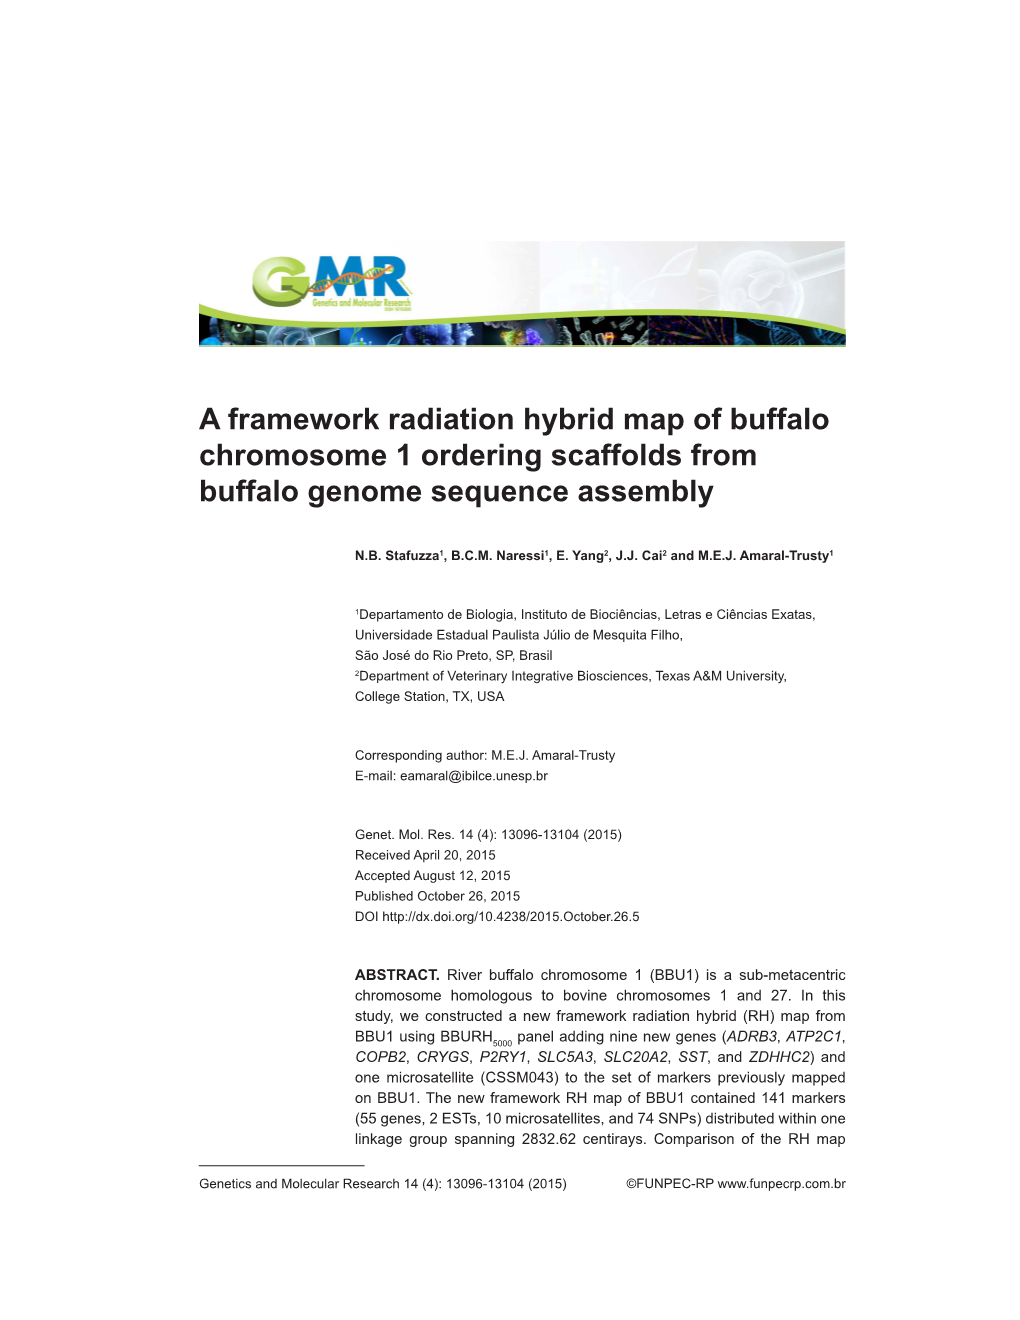 A Framework Radiation Hybrid Map of Buffalo Chromosome 1 Ordering Scaffolds from Buffalo Genome Sequence Assembly